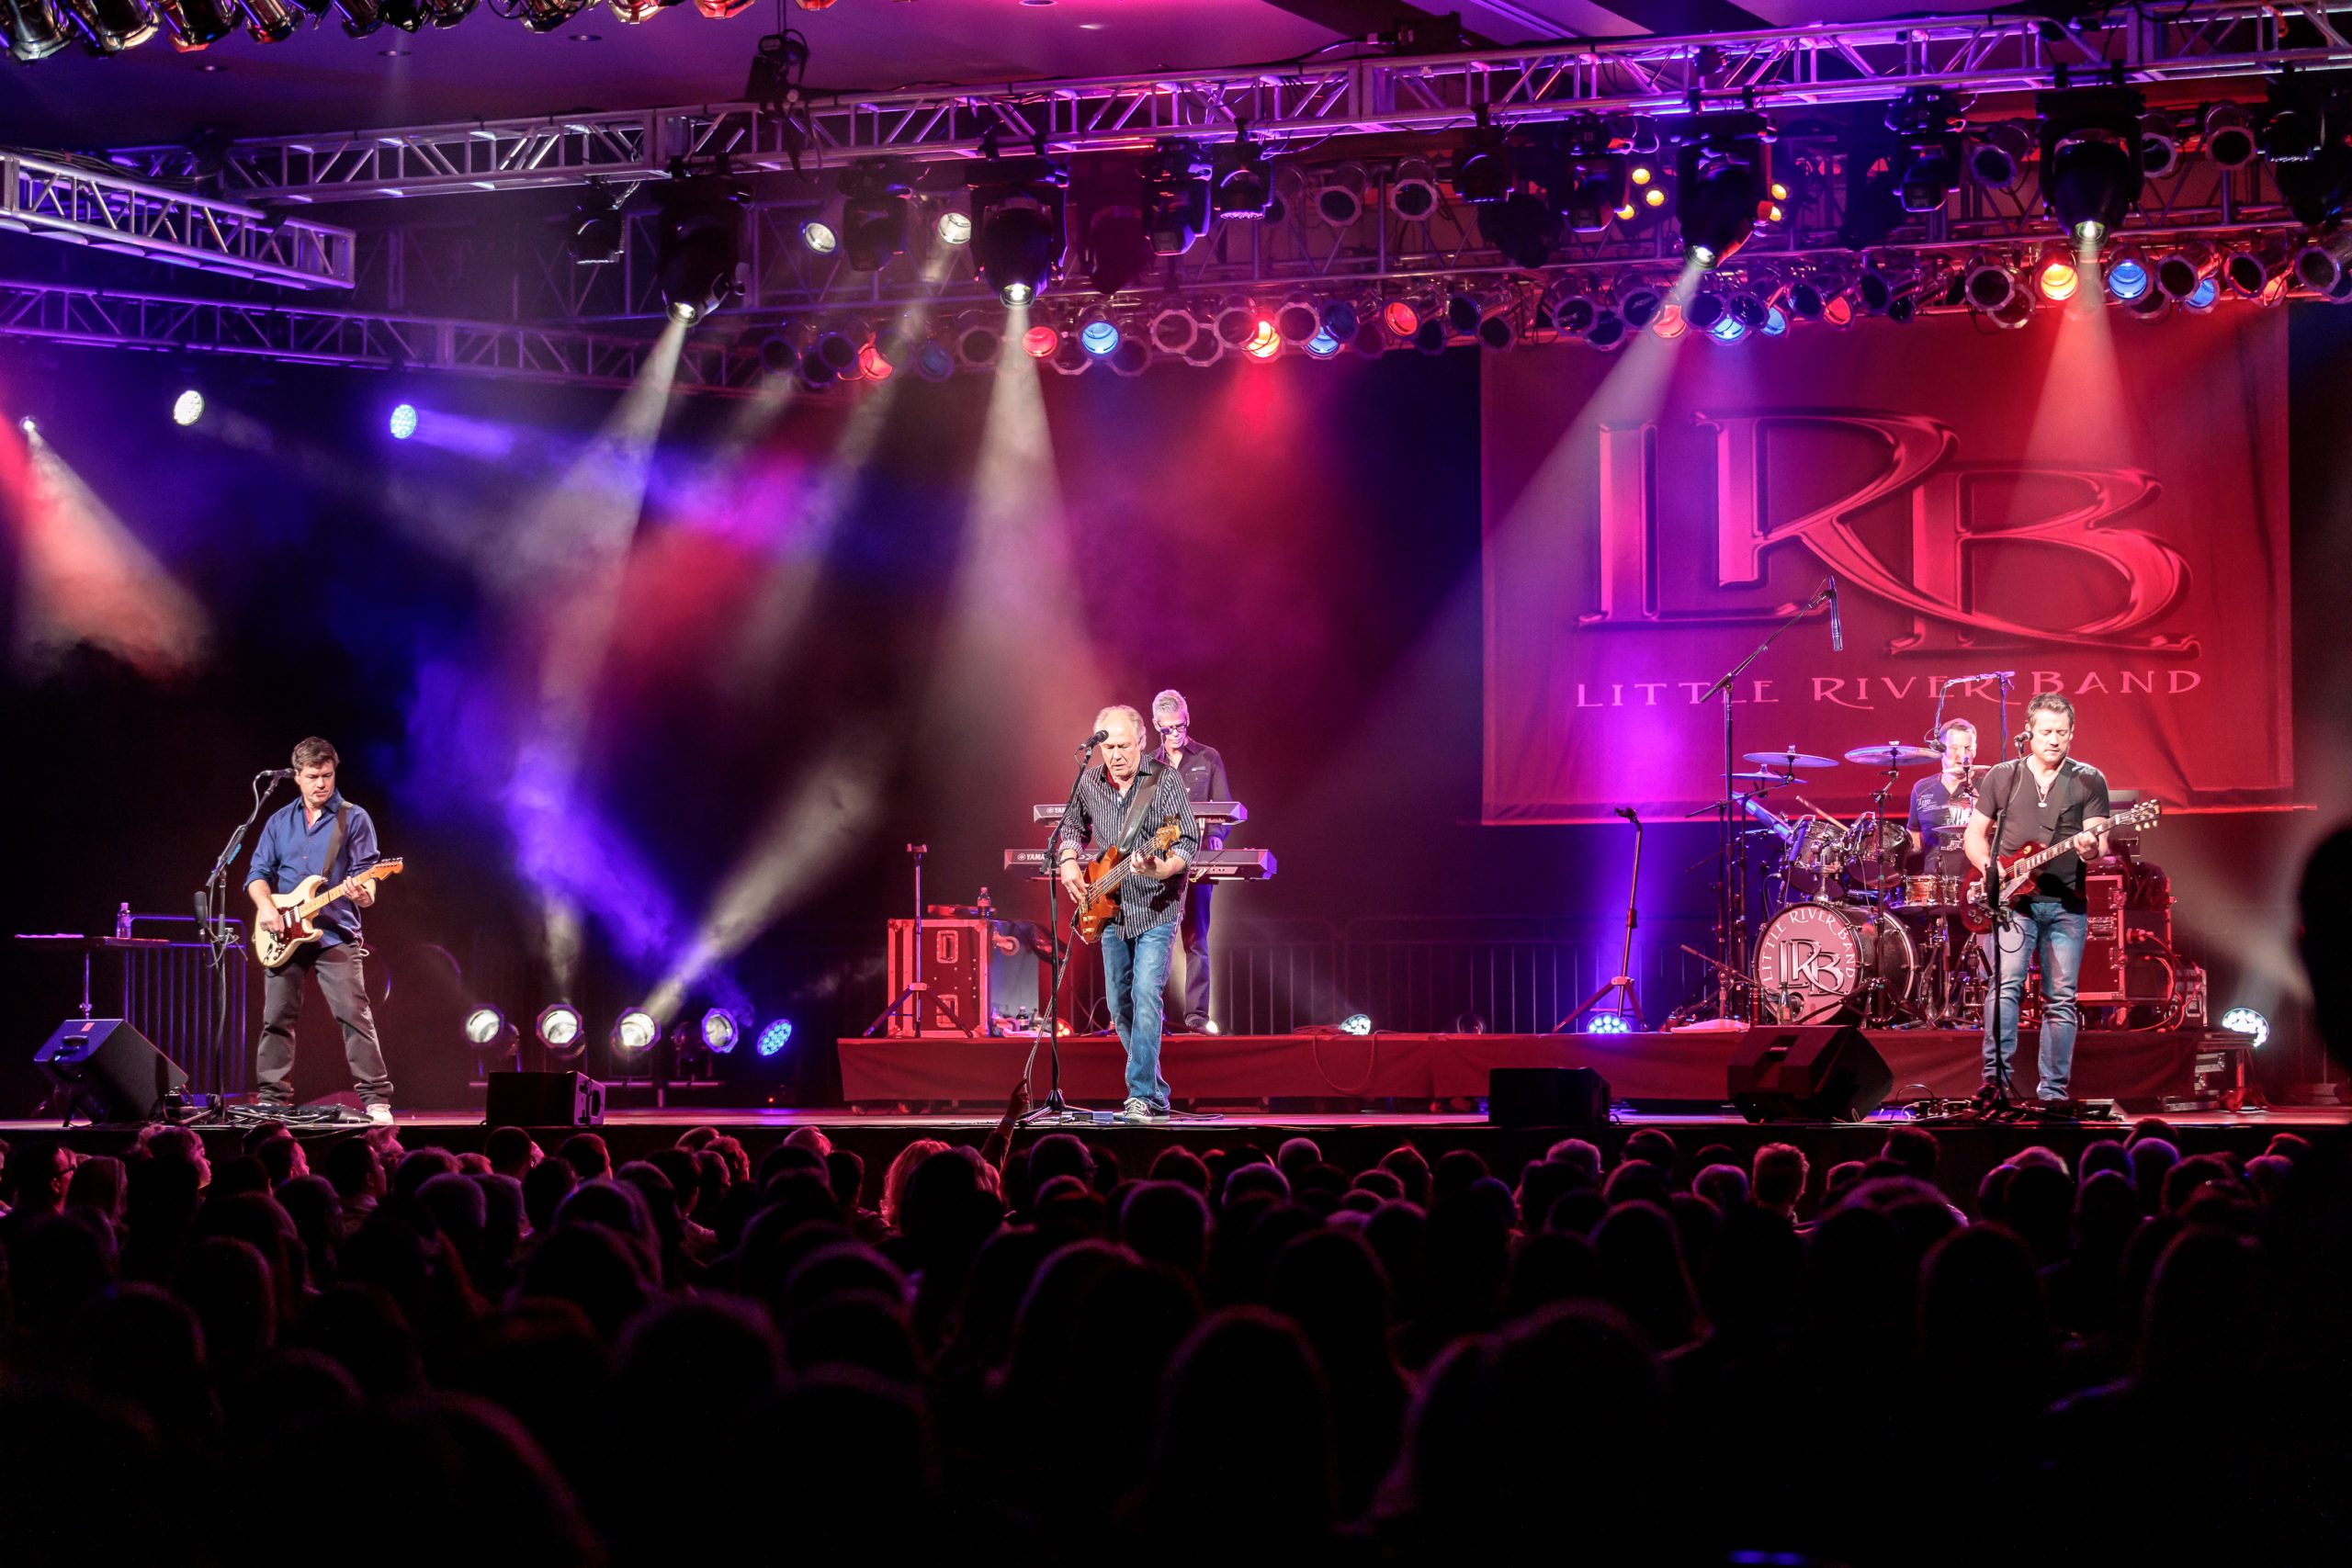 Little River Band hits the road for 2021 Concerts as live music resumes